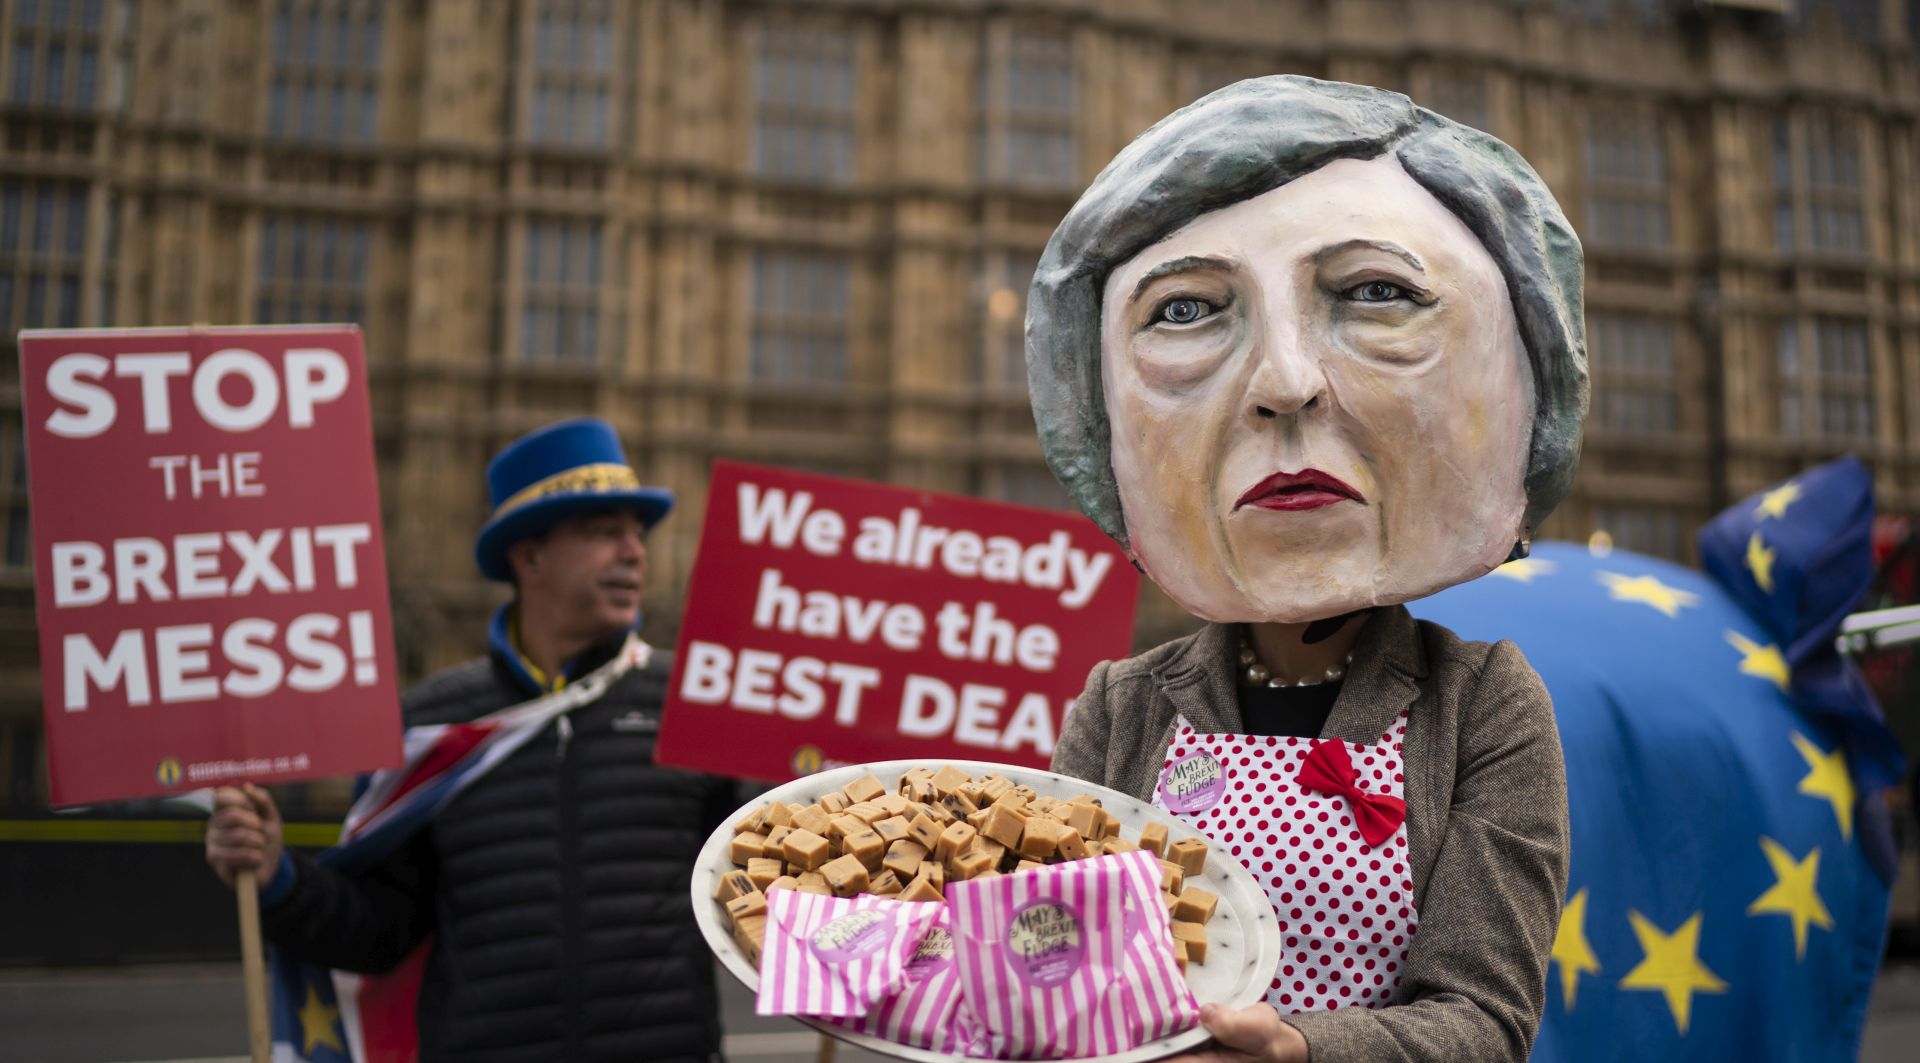 epa07221280 Anti-Brexit campaigner dressed as British Prime Minister Theresa May holding a plate of fudge poses for photographers outside Houses of Parliament in Central London, Britain, 10 December 2018. Prime Minister May faces a vote in the House of Commons tomorrow on her draft agreement with the European Union which is due to take the United Kingdom out of the European Union in March 2019.  EPA/WILL OLIVER